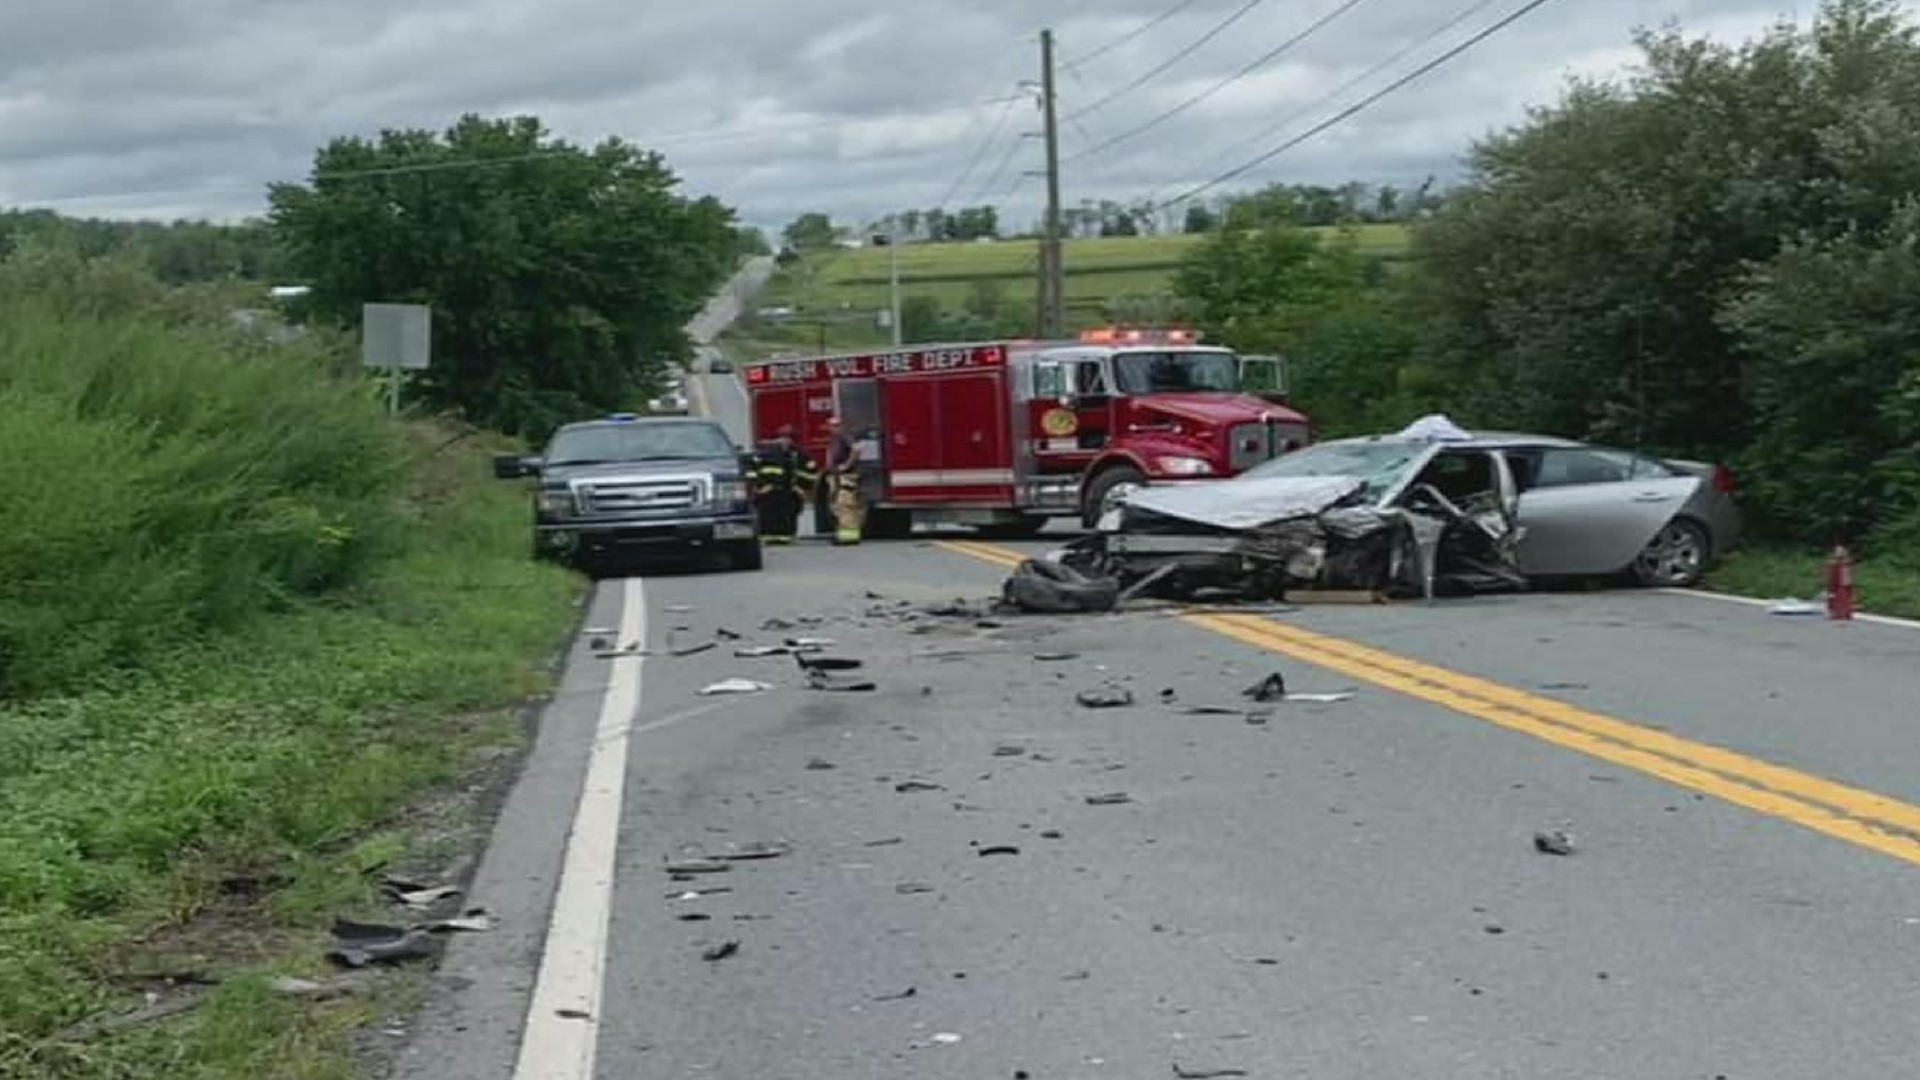 Emergency responders say two cars crashed into each other Saturday afternoon along Route 267 in Auburn Township.